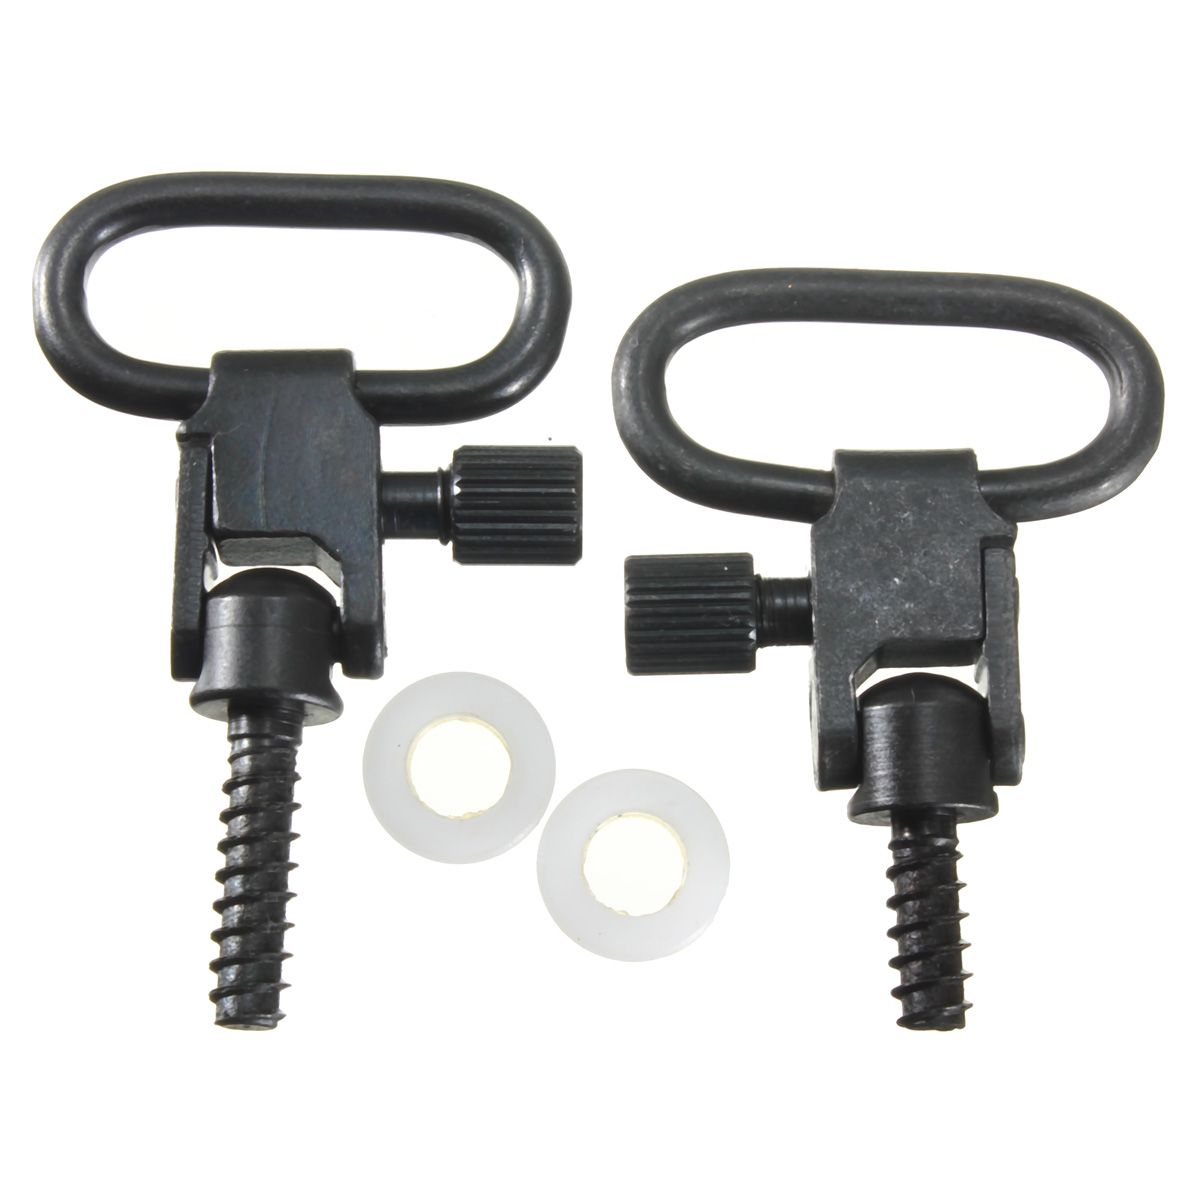 2Pcs-Black-Quick-Release-Detach-Sling-Mounting-Suspender-Loop-amp-Studs-With-White-Washers-1267491